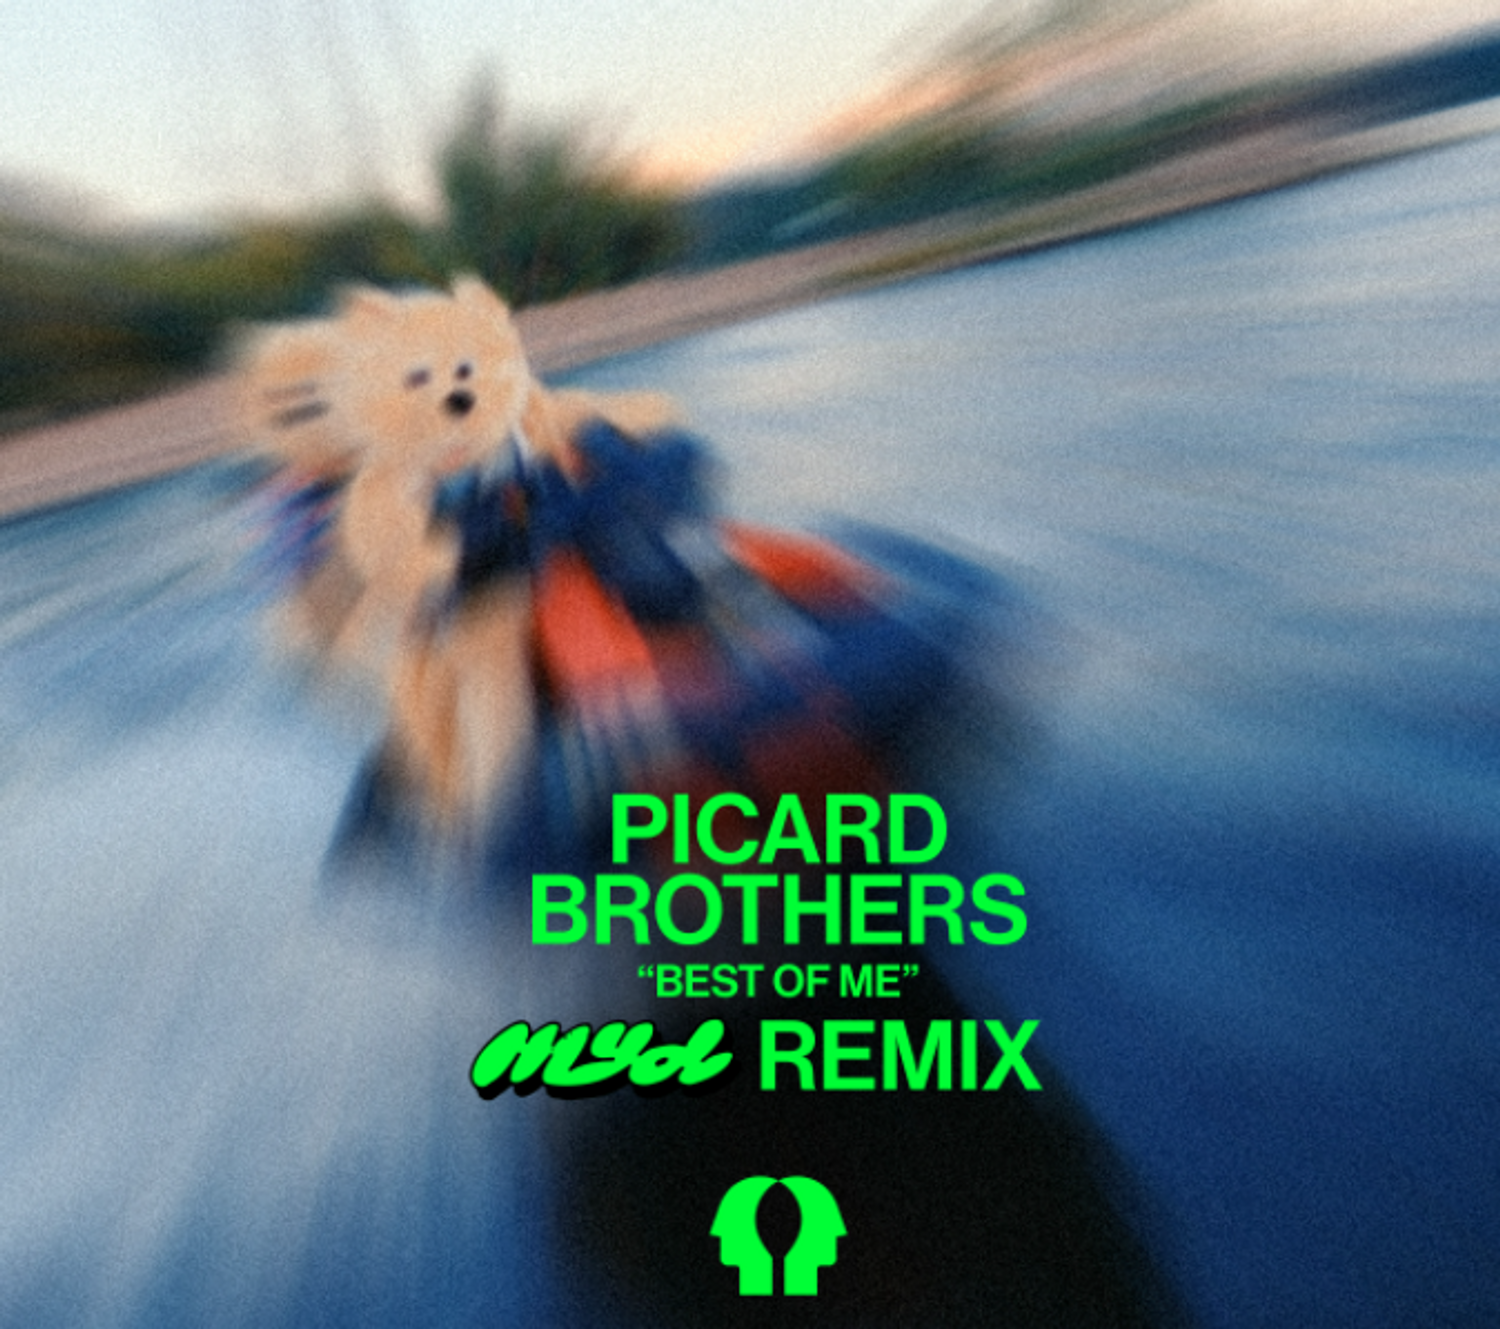 Myd remix les Picard Brothers 